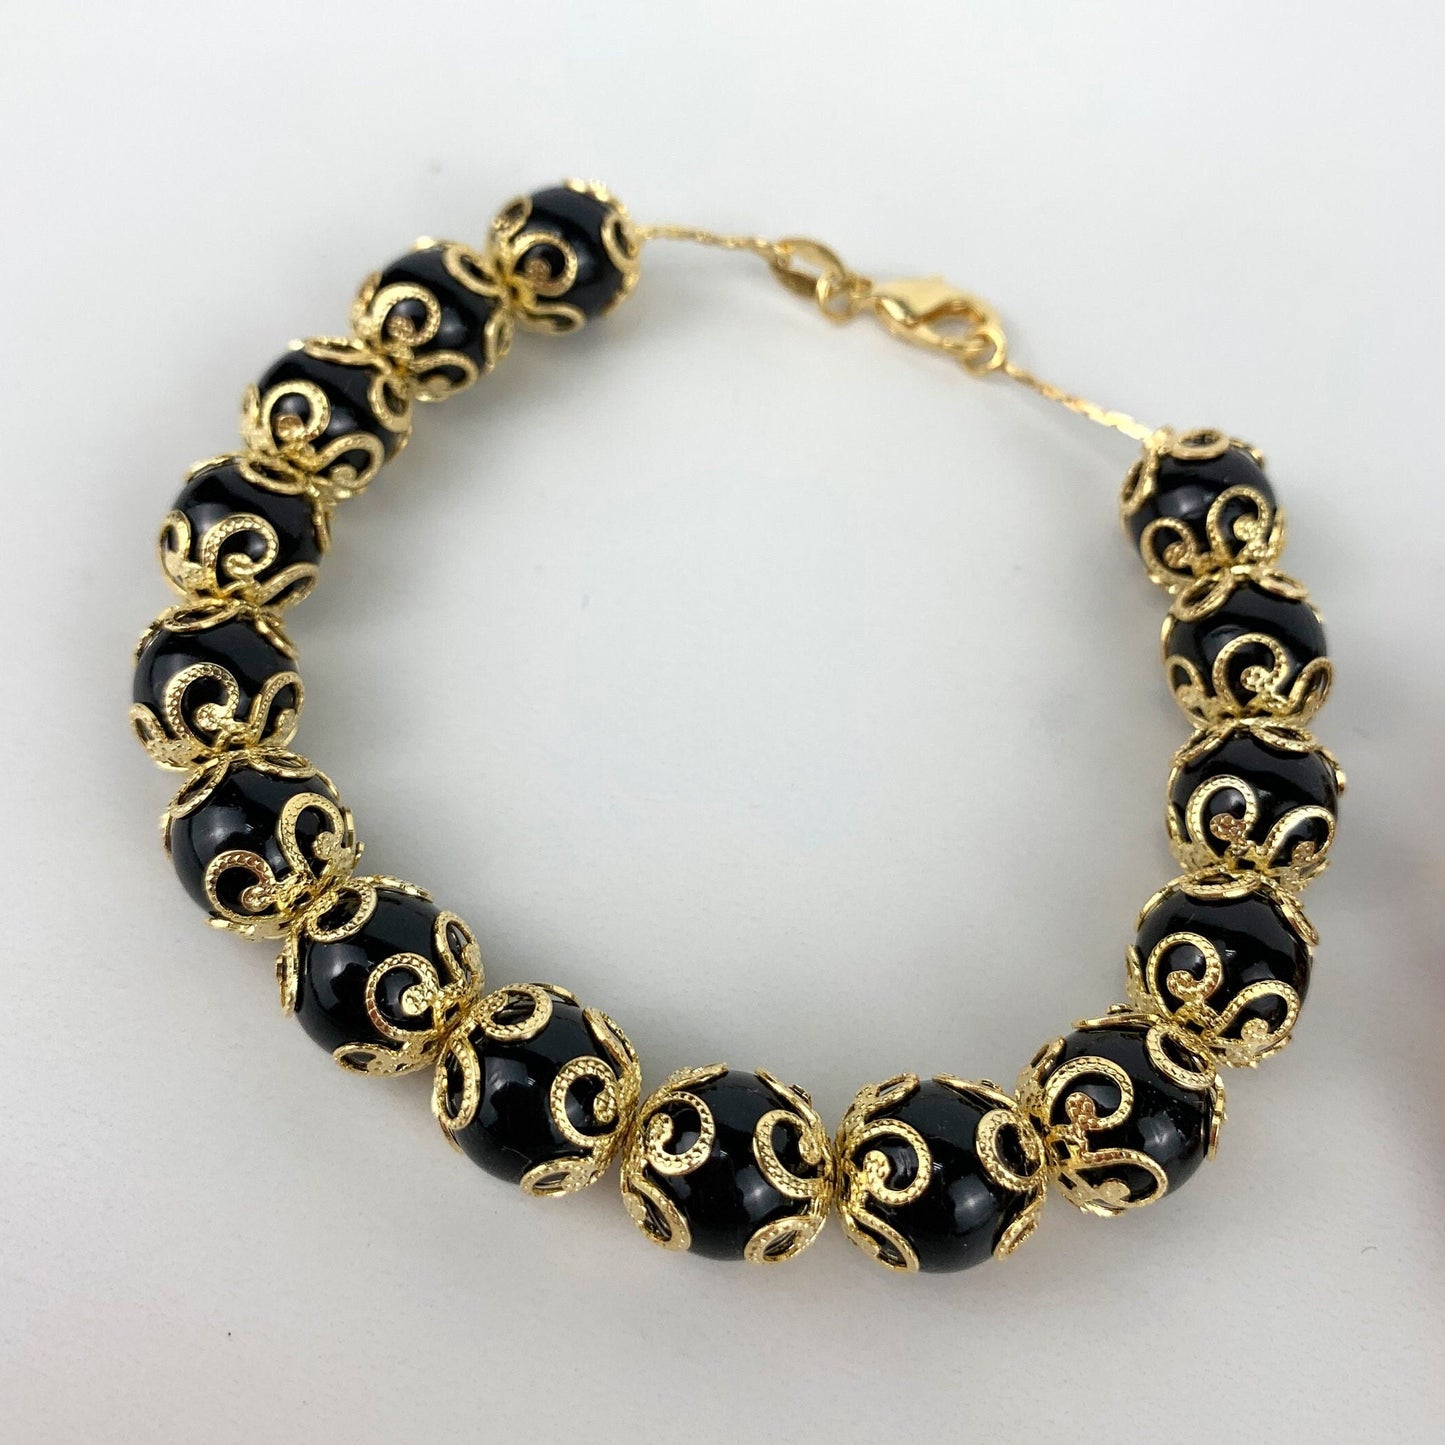 18k Gold Filled Embellished Bead Pearl Bracelet, Black, Pearl or Red, Wholesale Jewelry Making Supplies